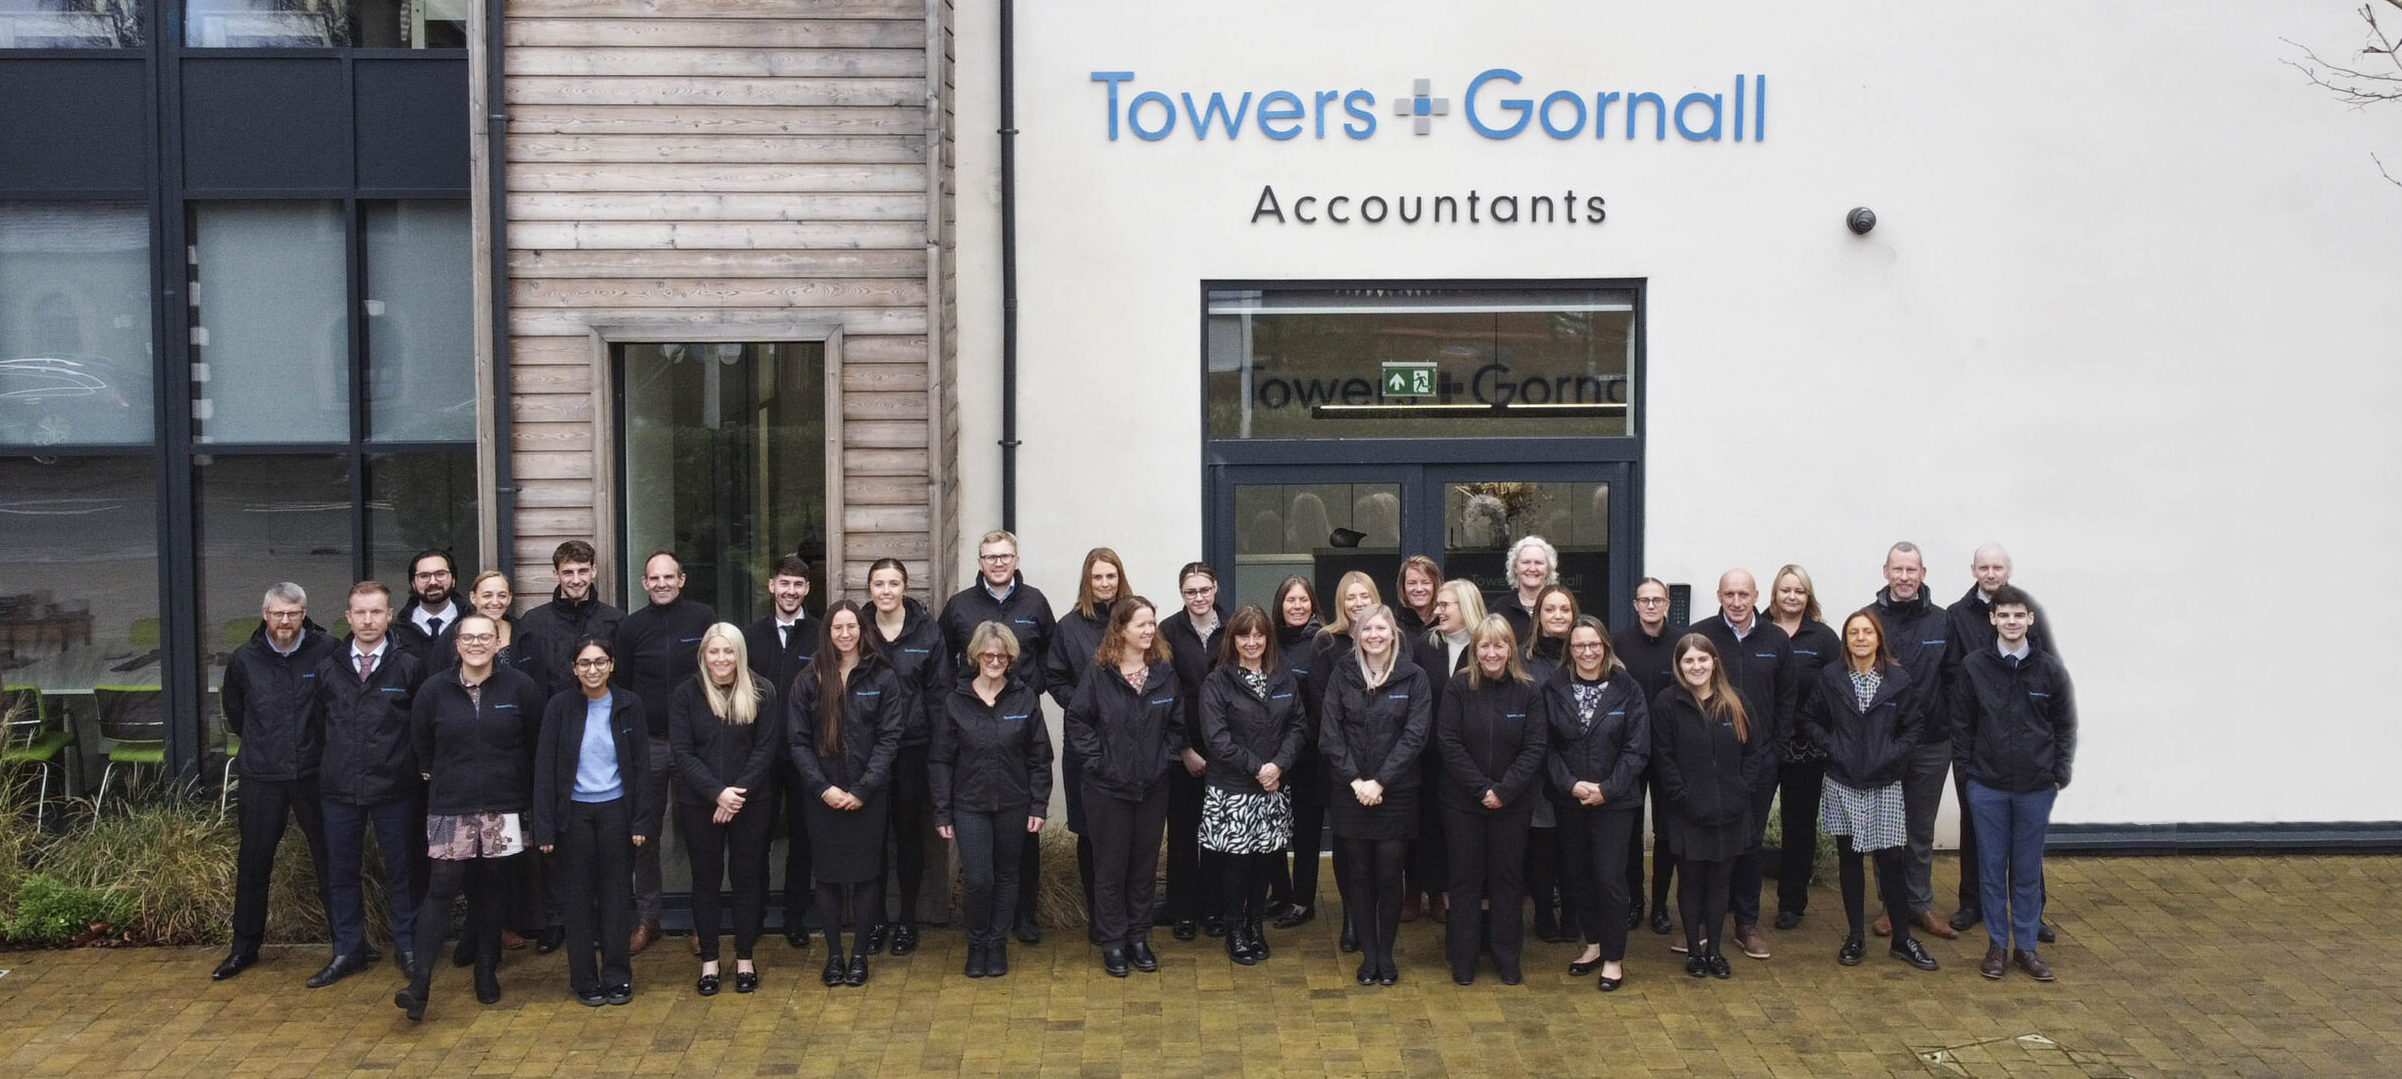 TOWERS AND GORNALL STAFF STOOD OUTSIDE OFFICE